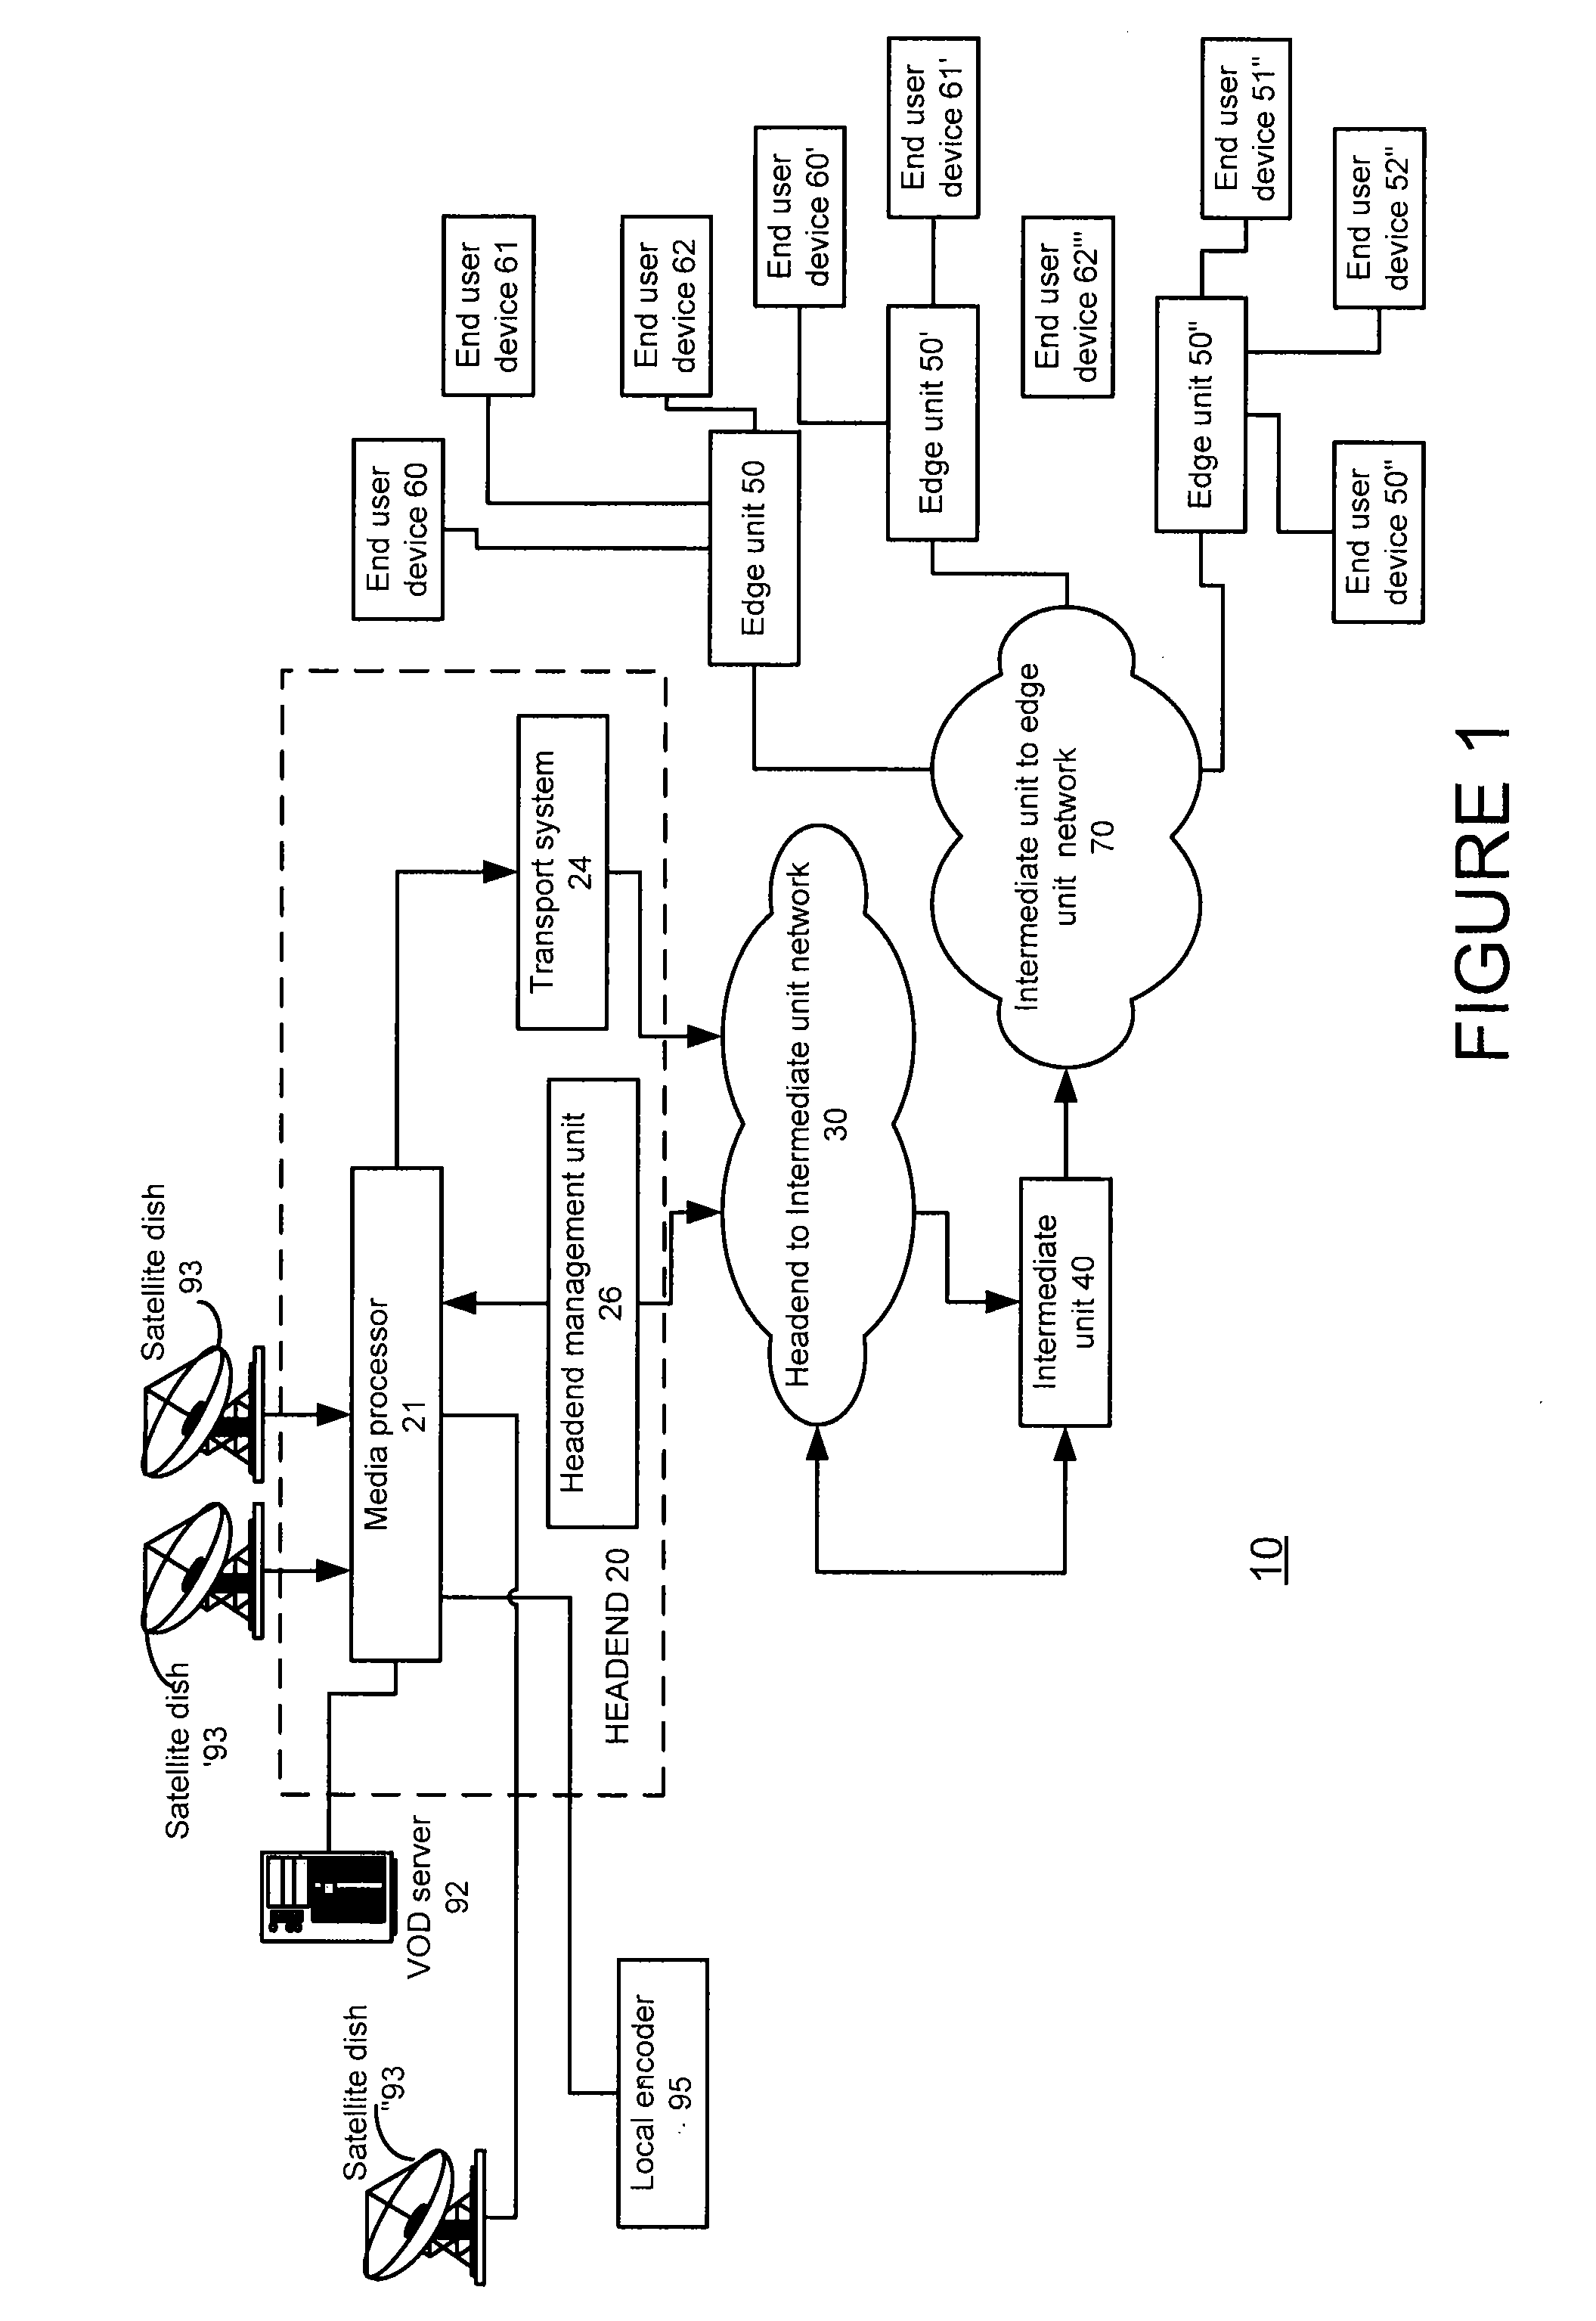 Method and device for providing programs to multiple end user devices